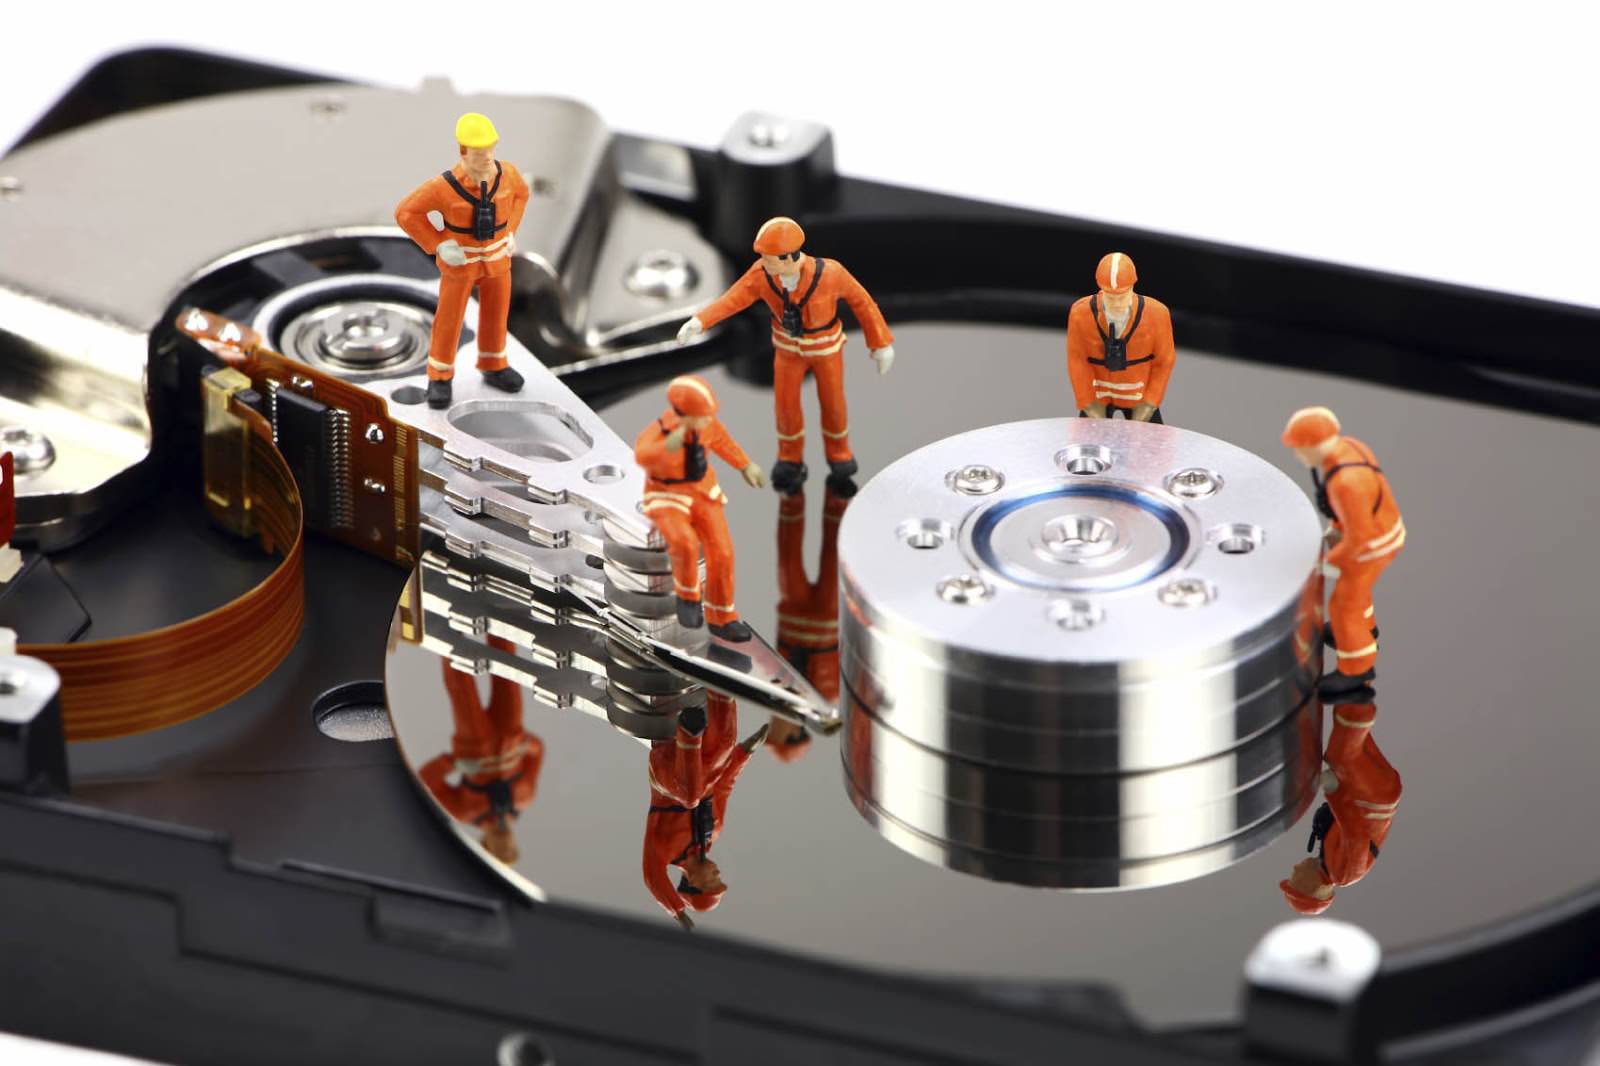 How To Data Recovery Services From Memory Card After Formatting?